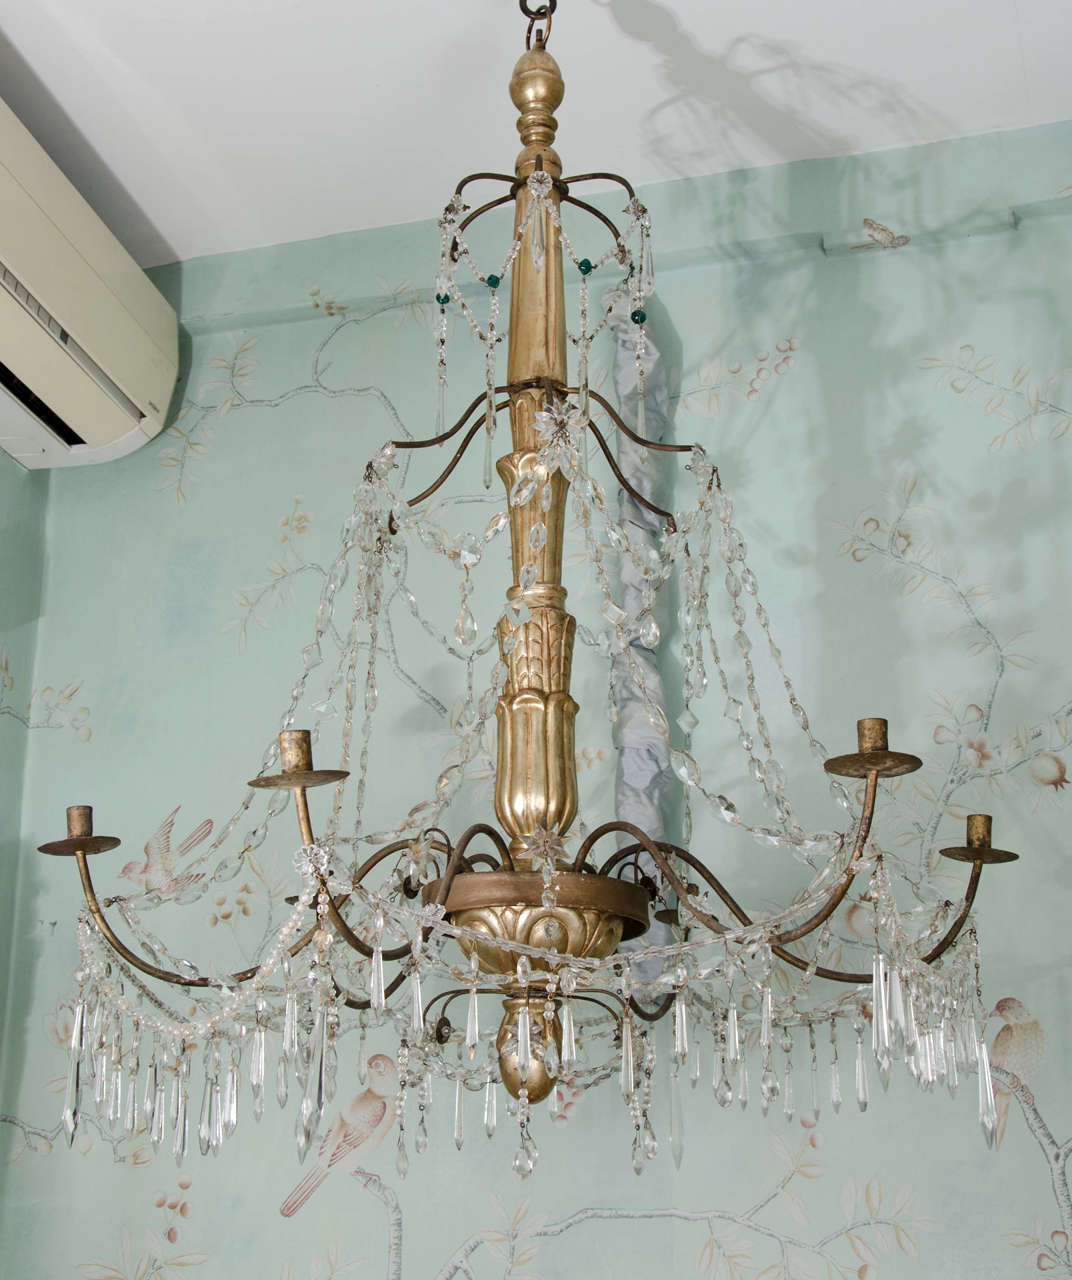 An elegant large-scale three-tier Italian late 18th century giltwood and crystal Genoese North Italian chandelier. The giltwood central column terminates in a finial at the bottom with carvings of acanthus leaves on the central stem. Six large